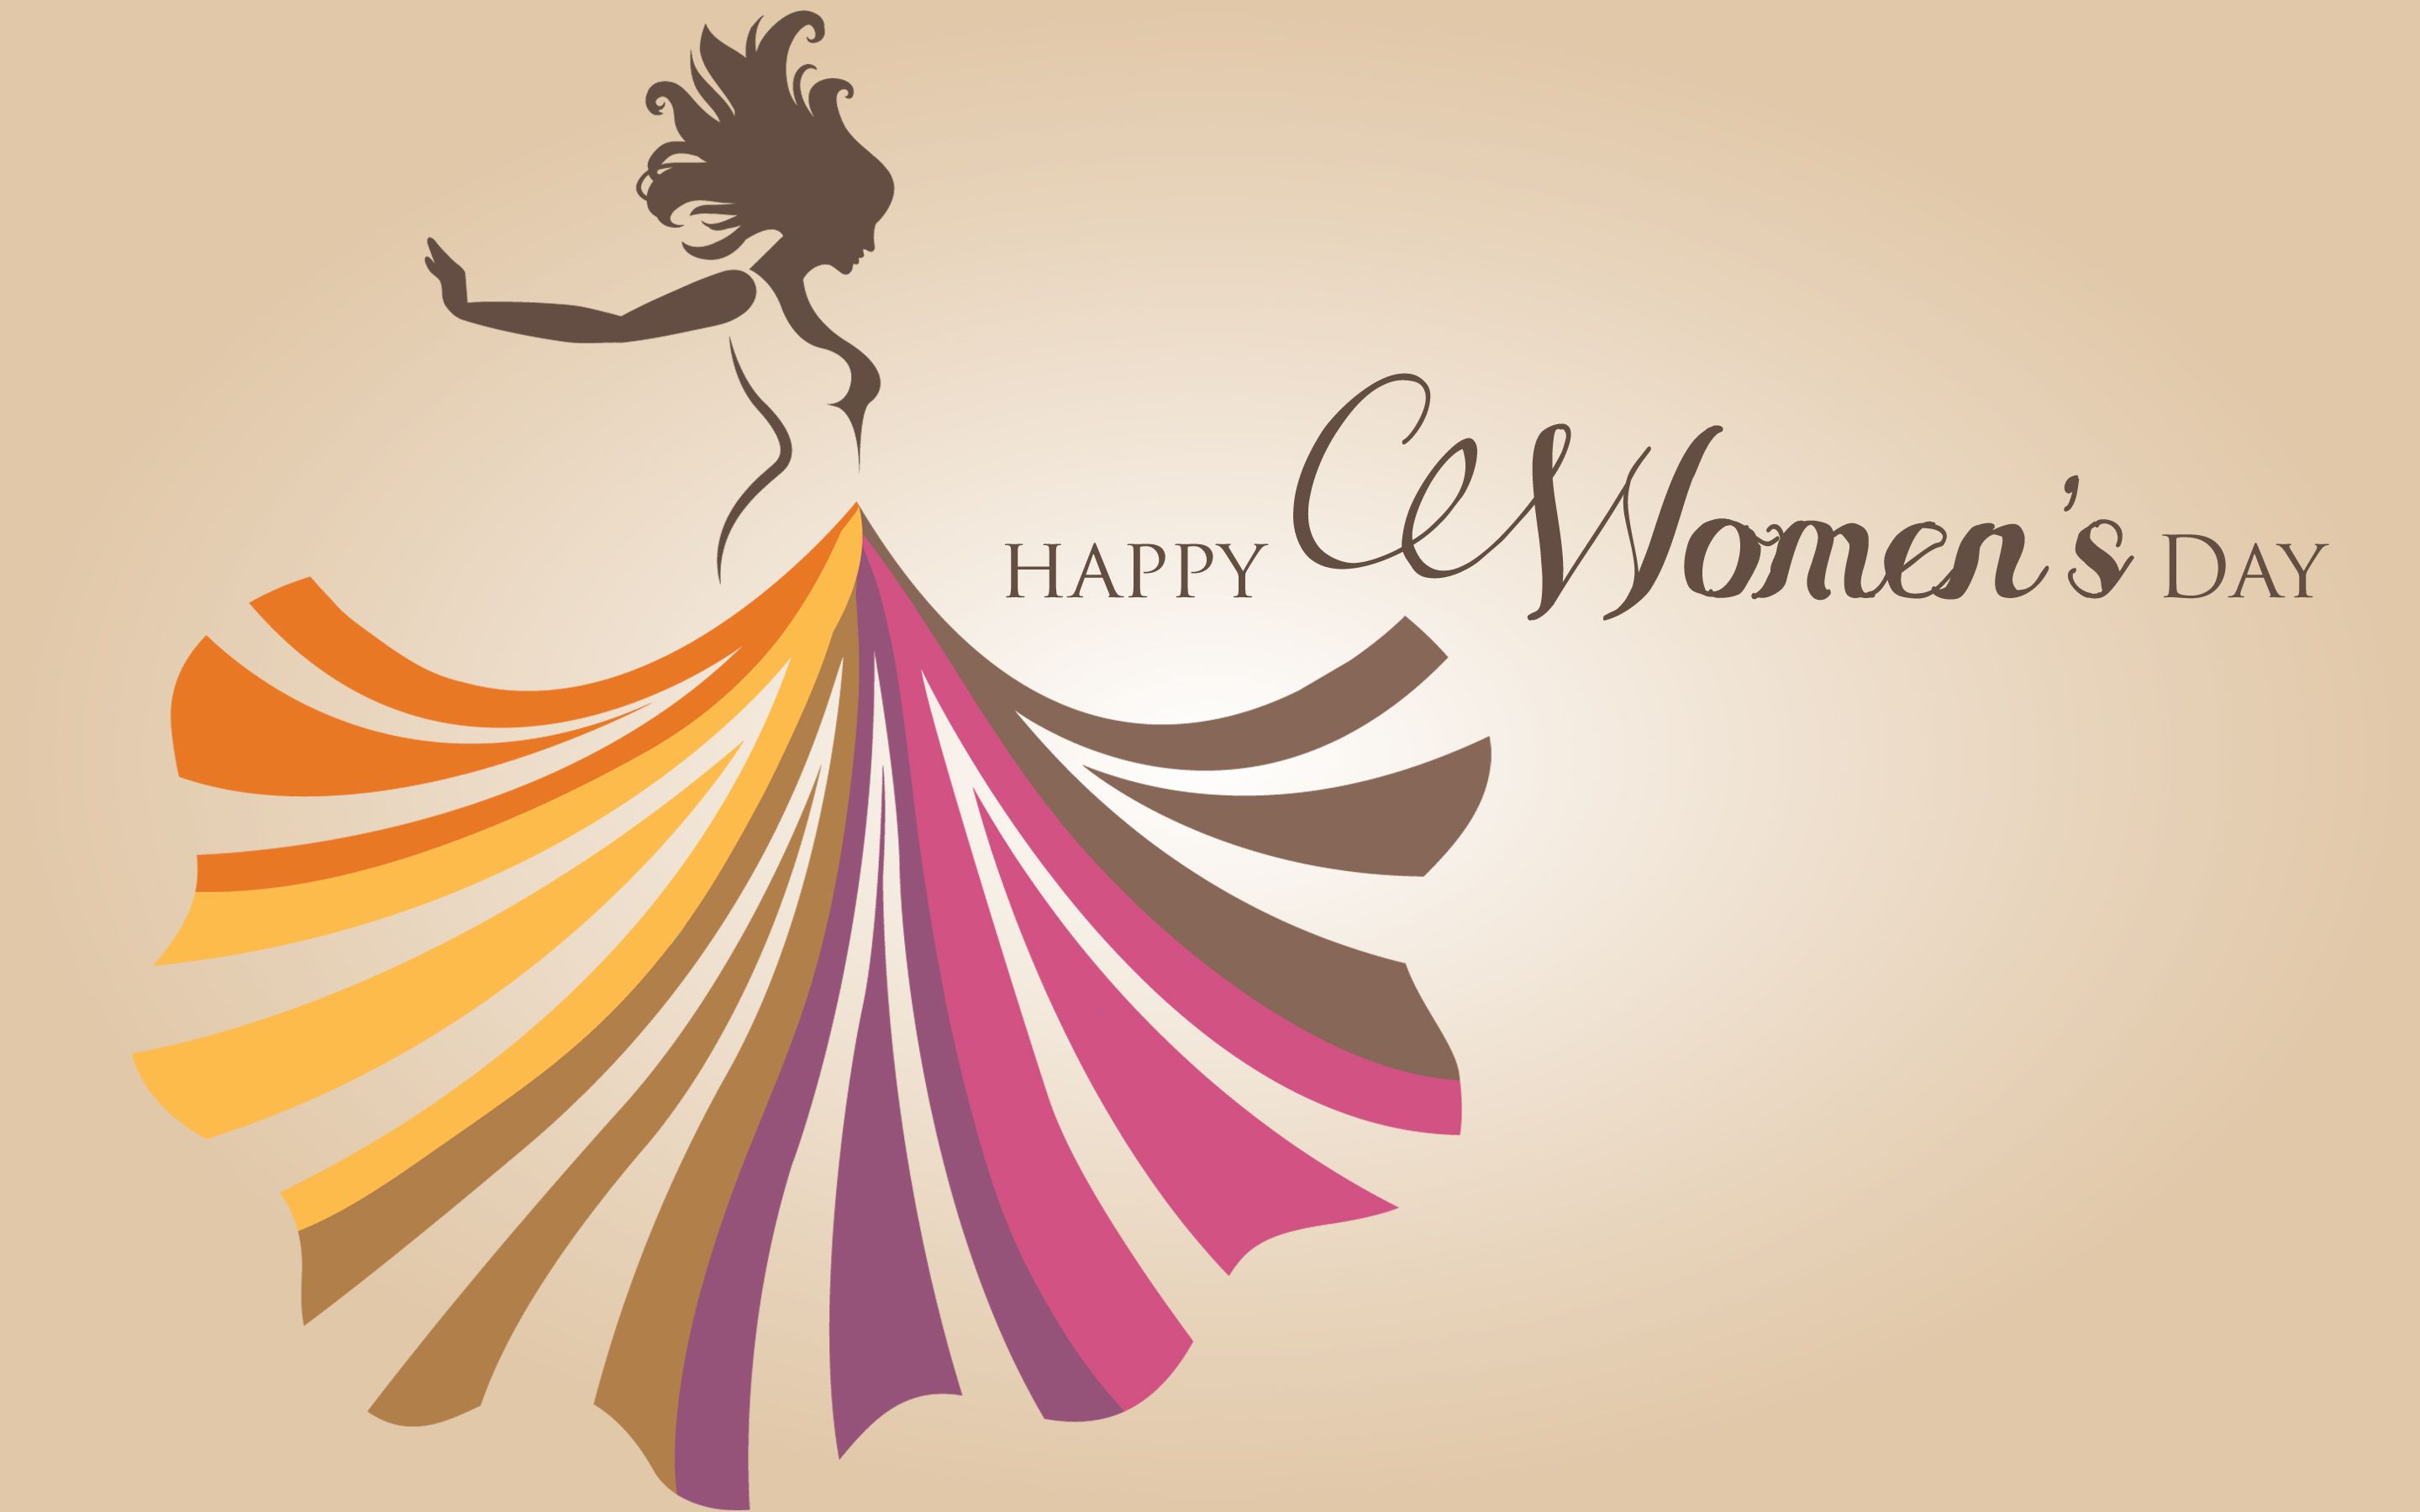 Happy International Women's Day 2022: Wishes Images, Status